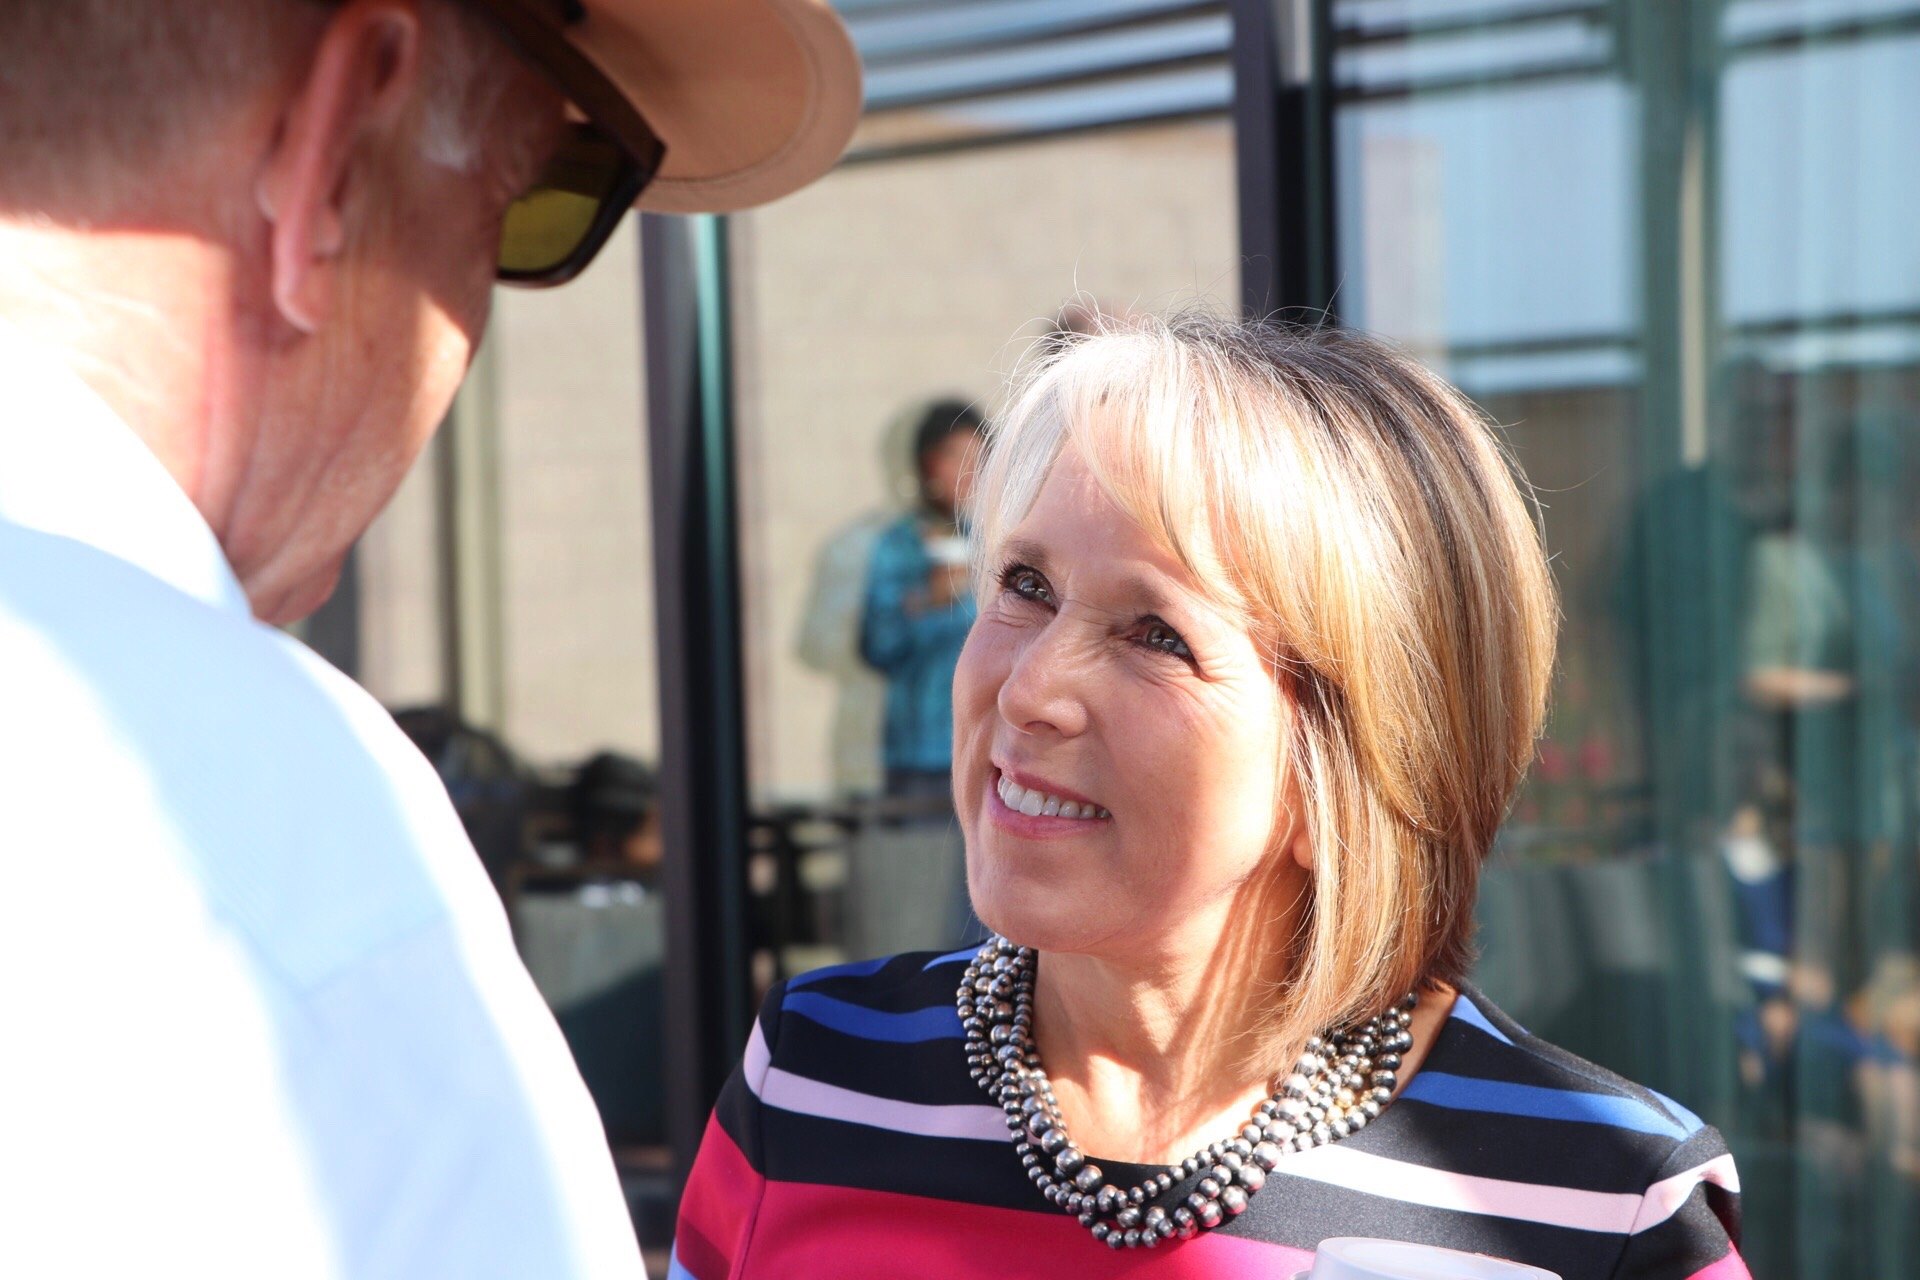 Community Cabinet Office Of The Governor Michelle Lujan Grisham